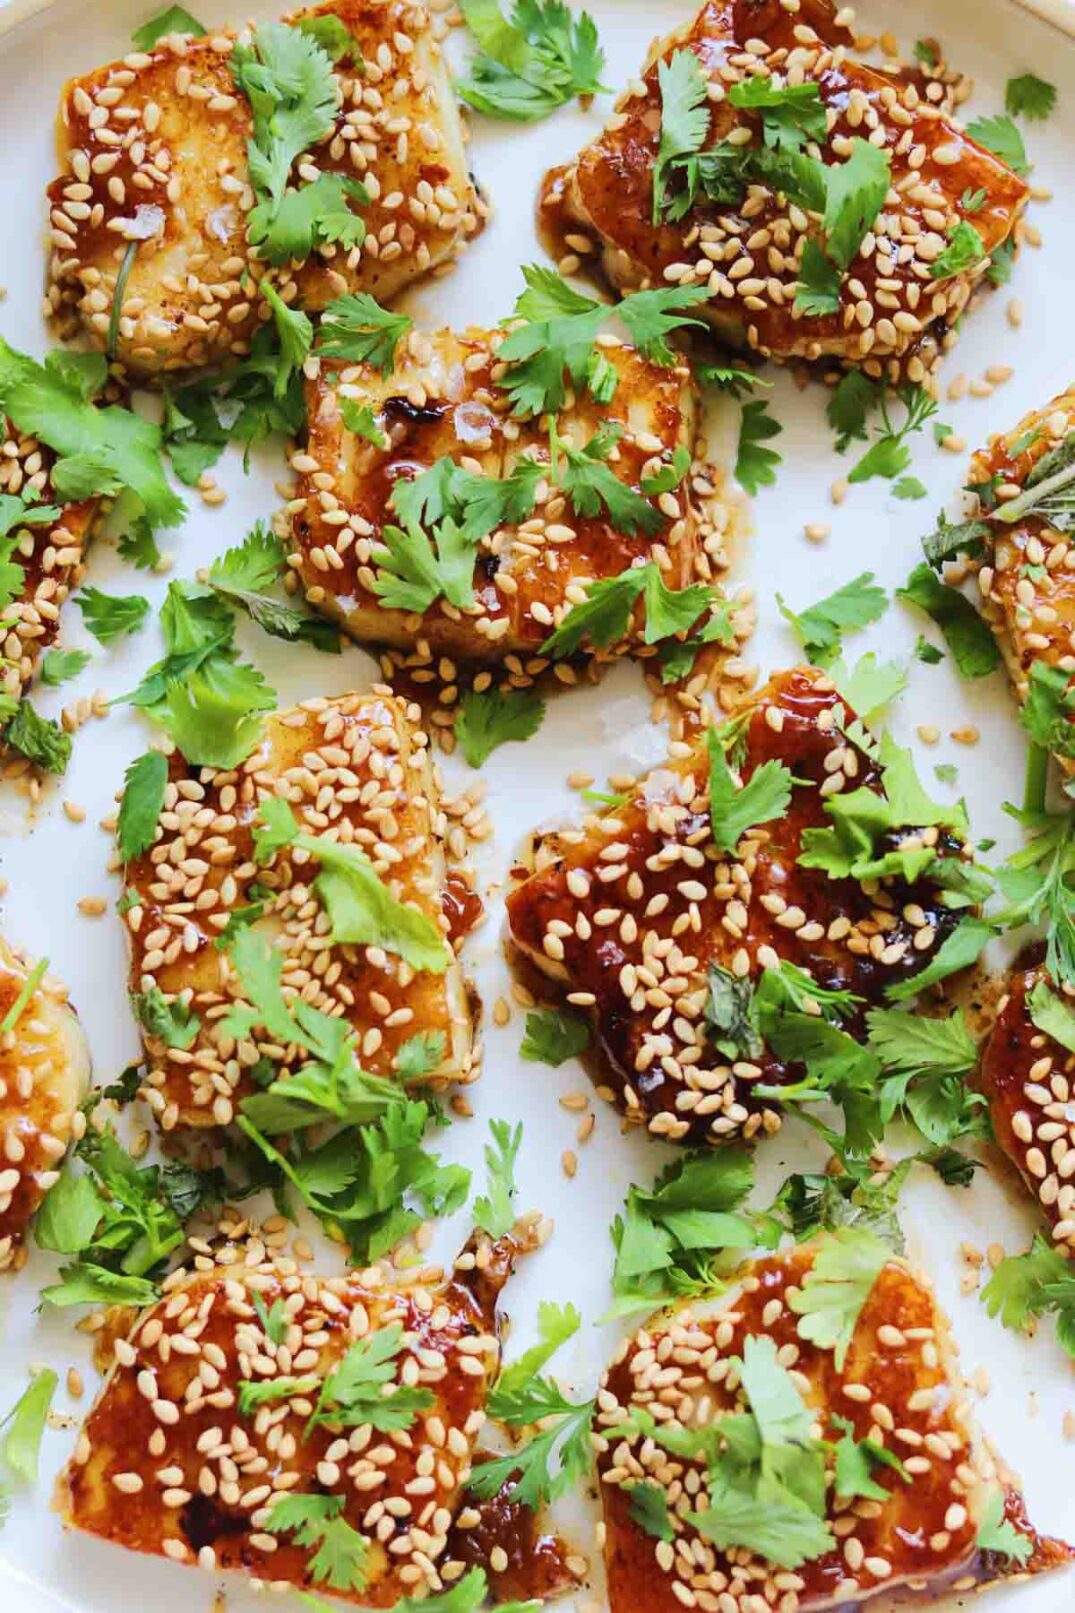 a plate of fried halloumi bites with sesame seeds and fresh herbs.